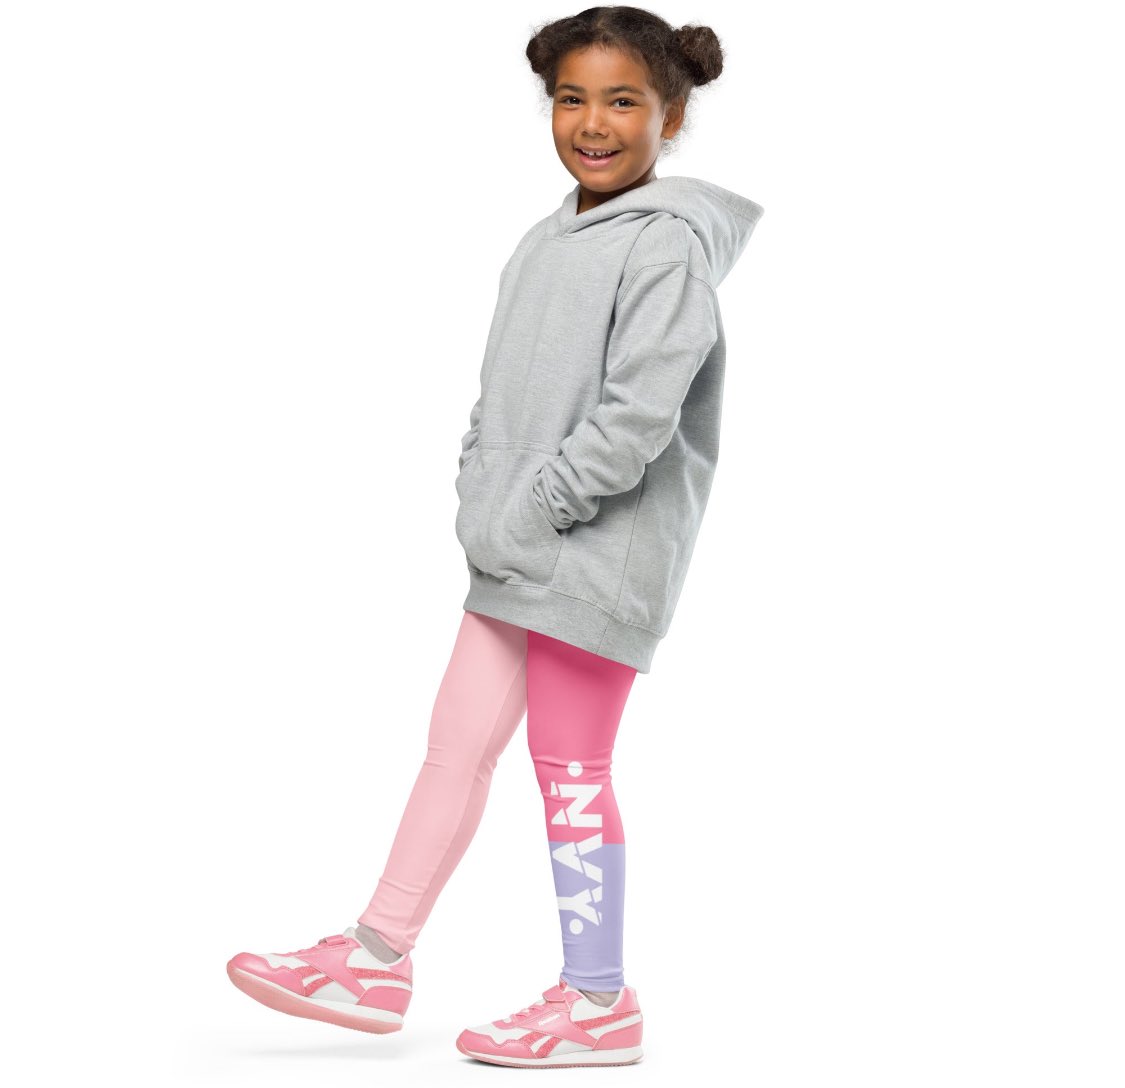 ⭐️Get your little one ready to rock (and lounge) in these adorable girls pink leggings. Made with love and comfort in mind, these leggings are perfect for playtime, and everything in between. With a cute and playful design, your child will be the star of the playground⭐️